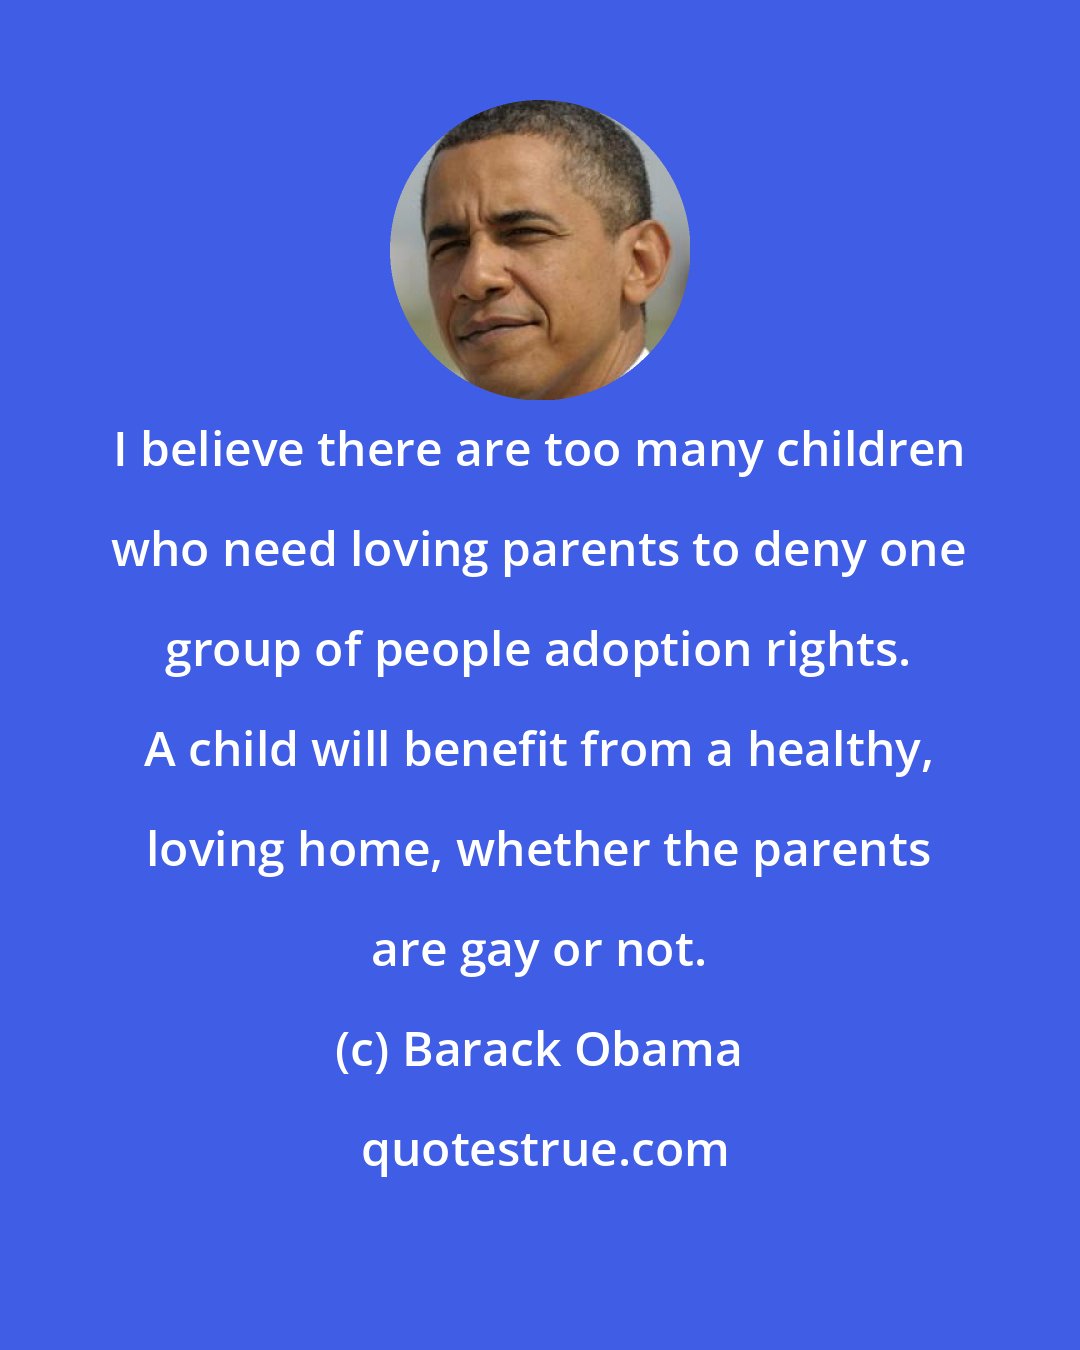 Barack Obama: I believe there are too many children who need loving parents to deny one group of people adoption rights. A child will benefit from a healthy, loving home, whether the parents are gay or not.